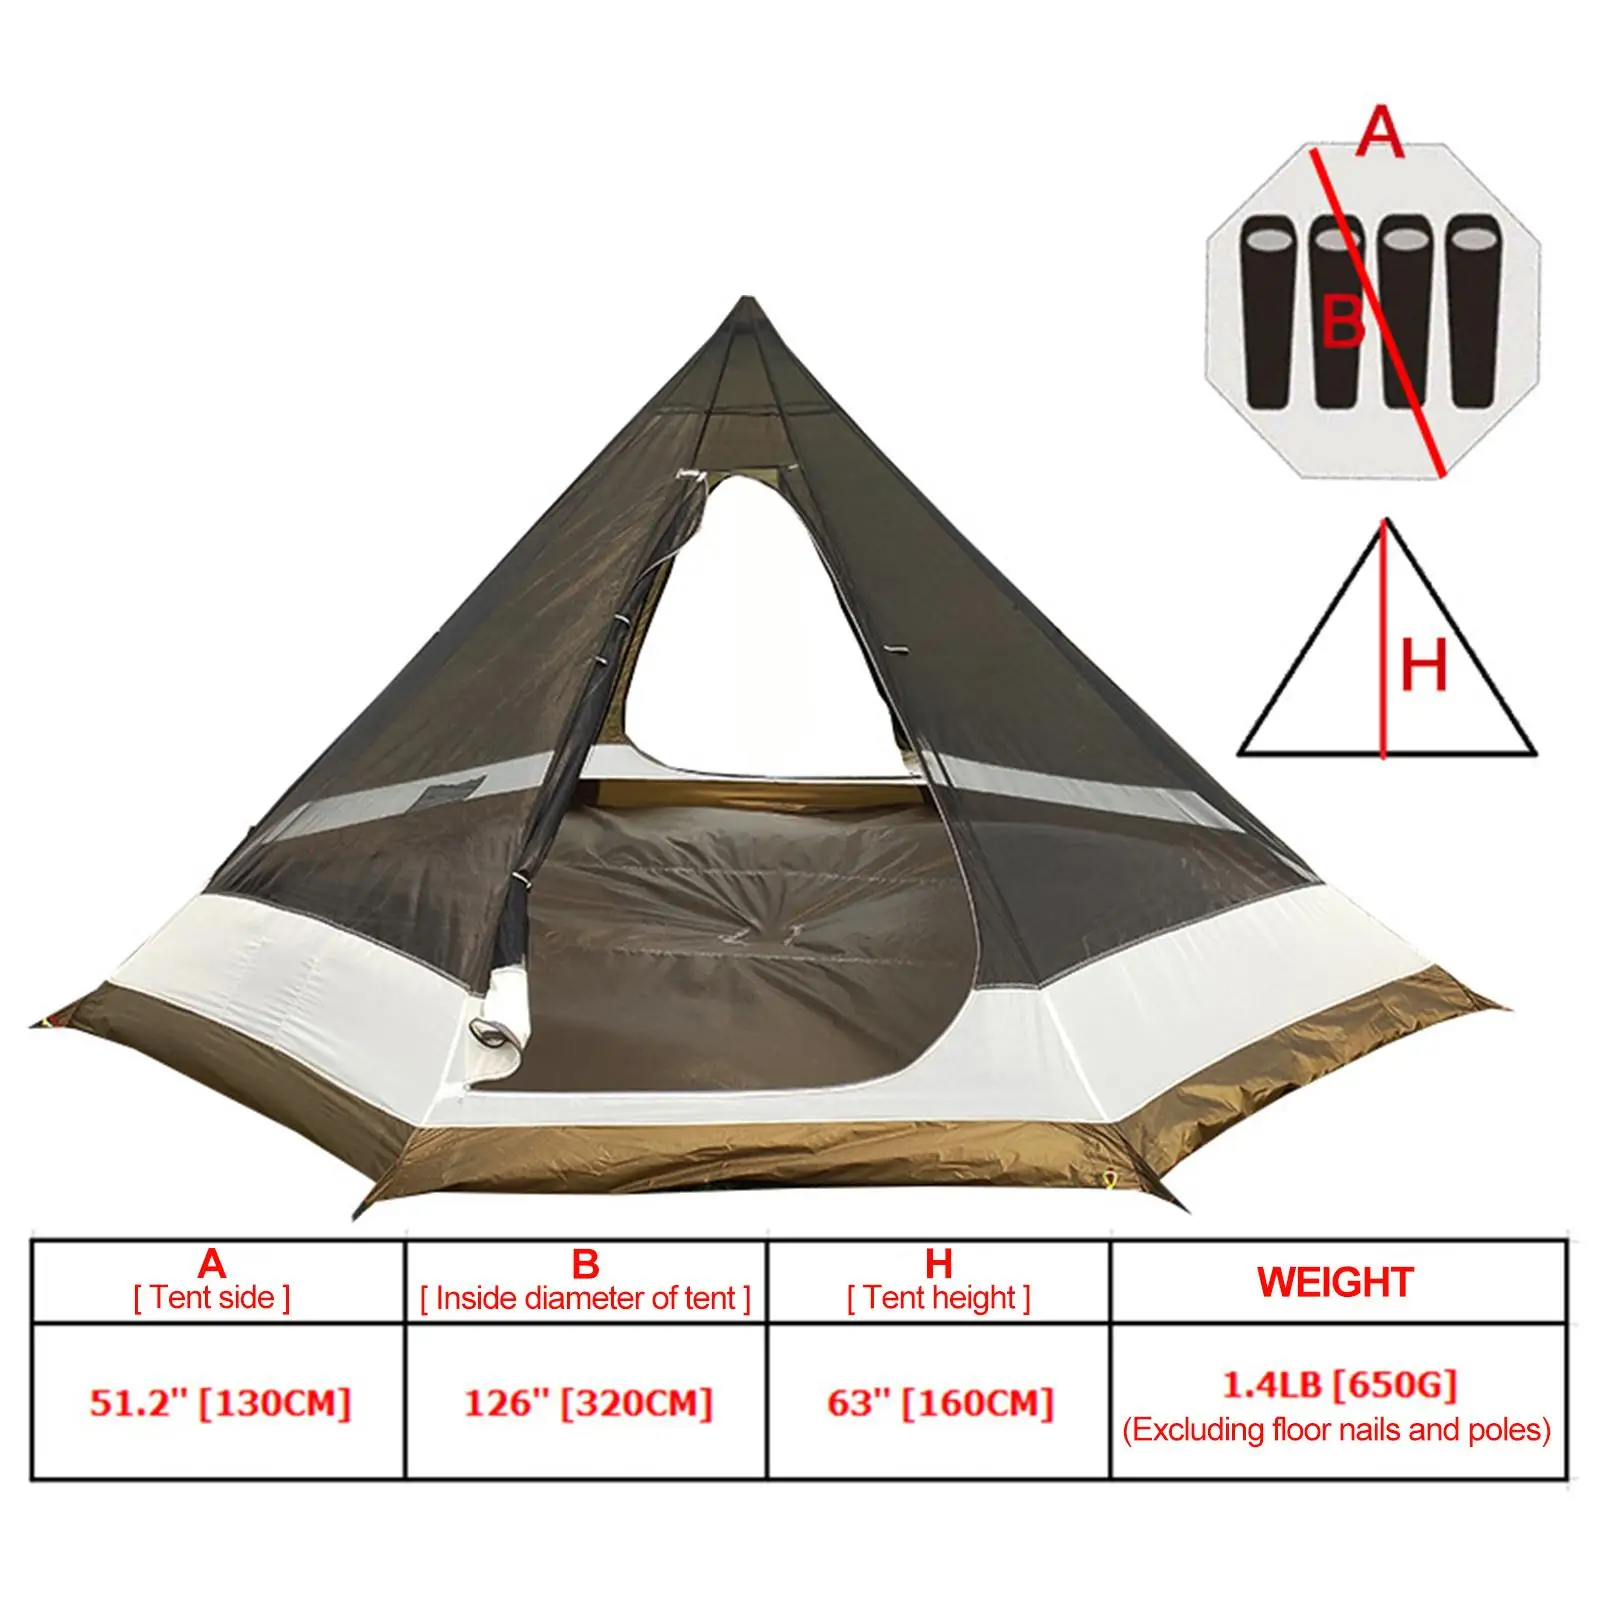 Trekking Tent for Backpacking, Pyramid Hot Tent, Ultralight Tent, Hiking Tent, Lightweight Camping Tent